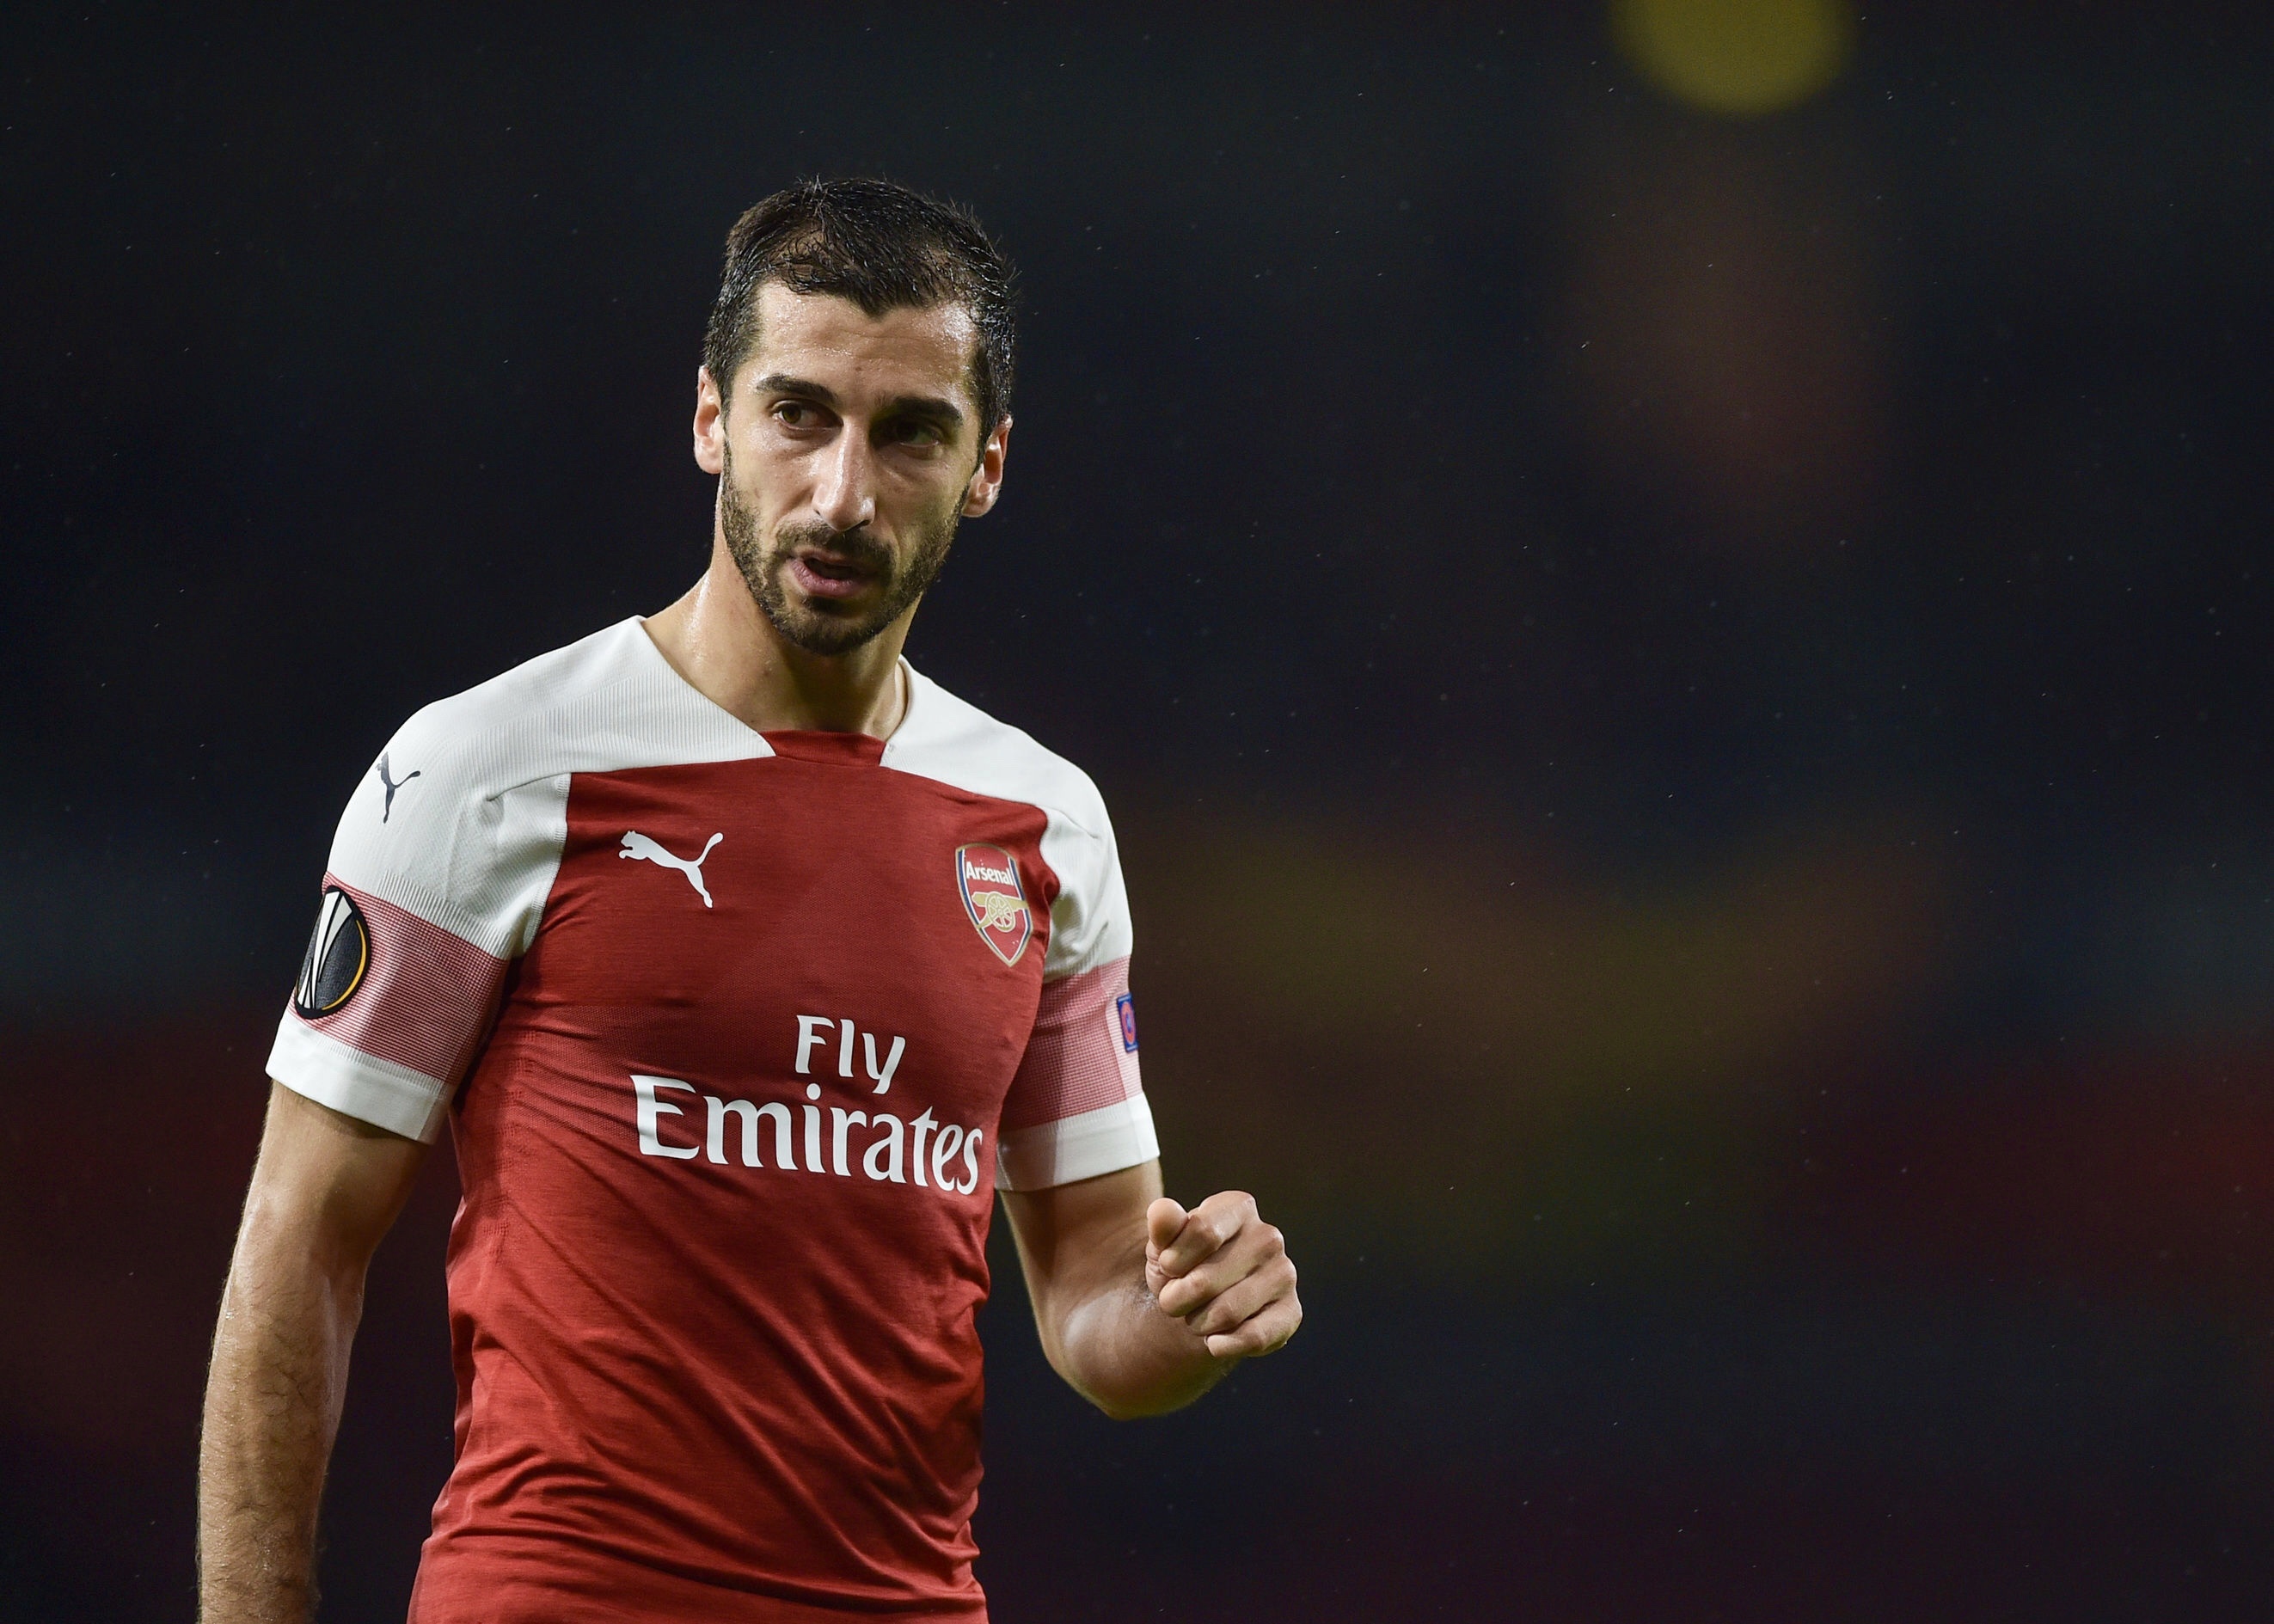 Mkhitaryan could miss Europa League final due to political tensions